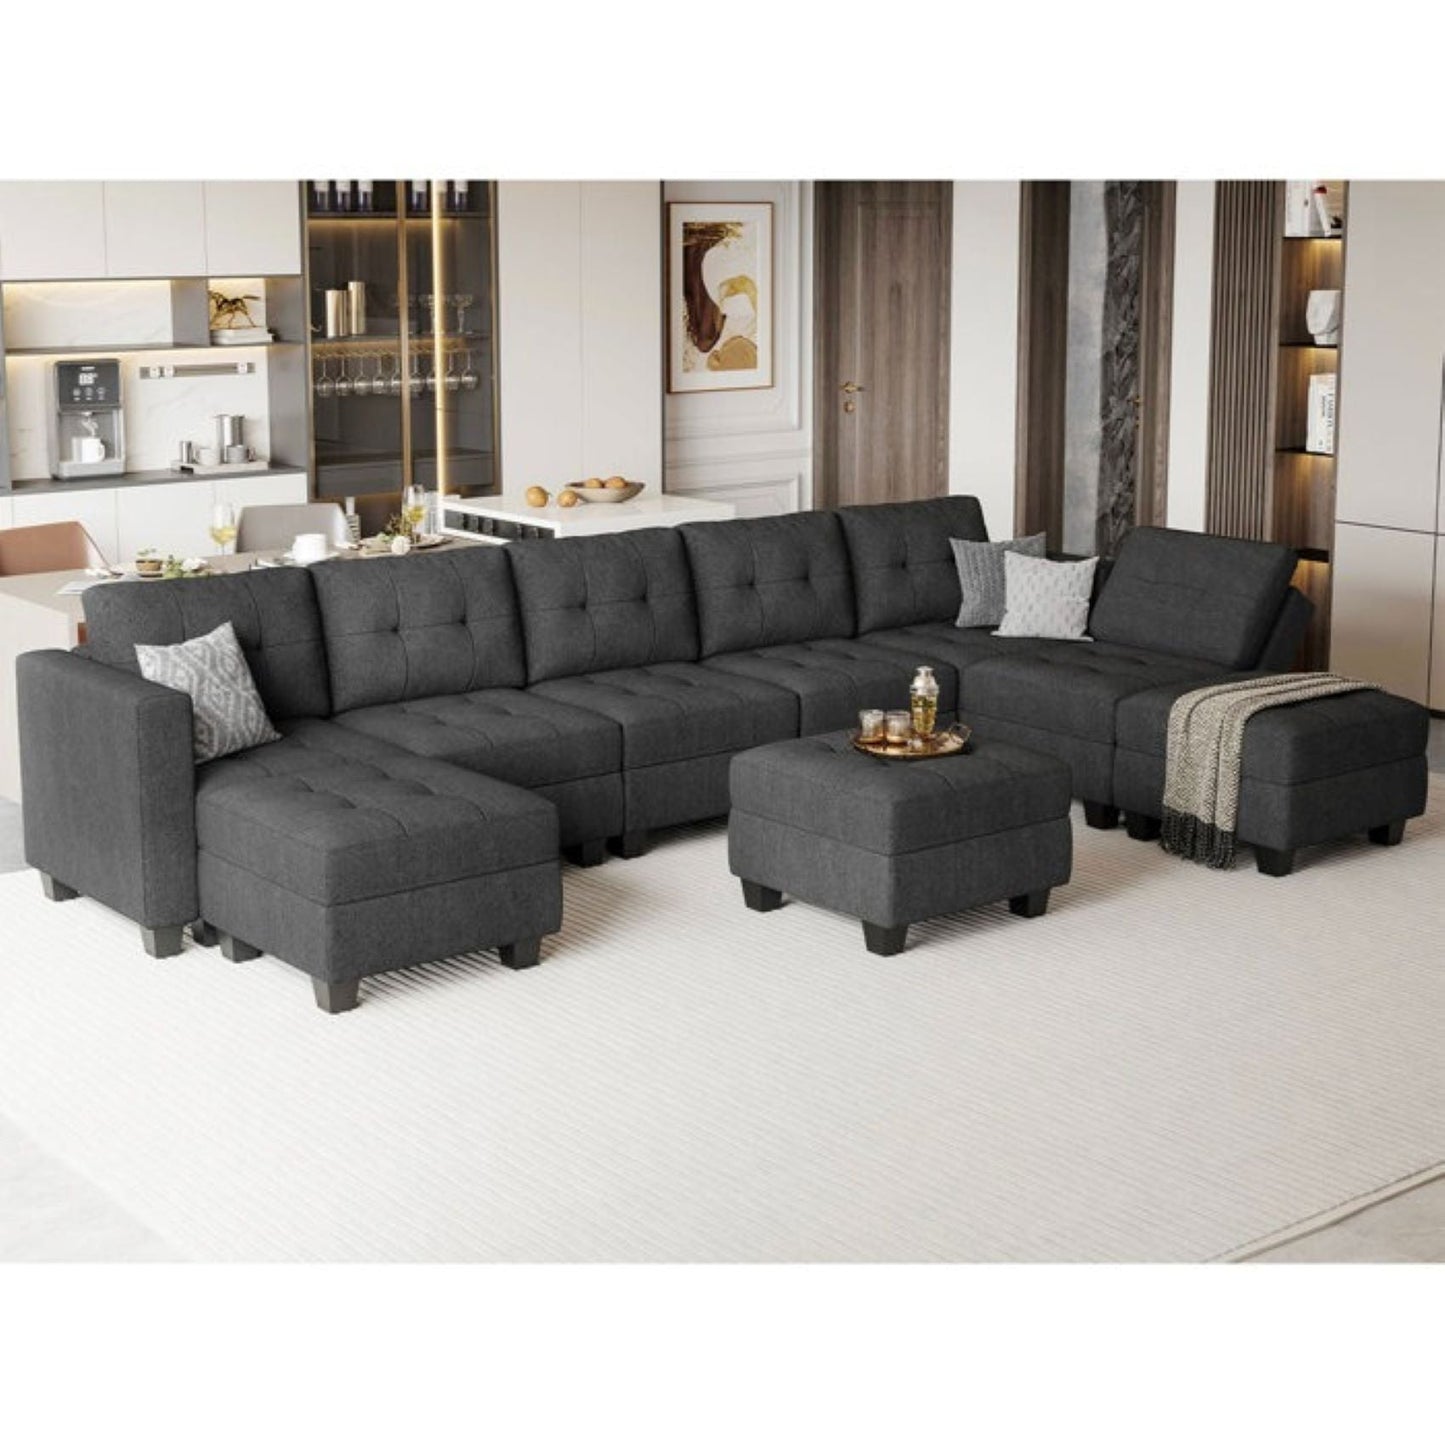 Alton 9 Seater Interchangeable Modular Fabric Sofa with Storage Ottoman For Living Room | Bedroom | Office - Torque India